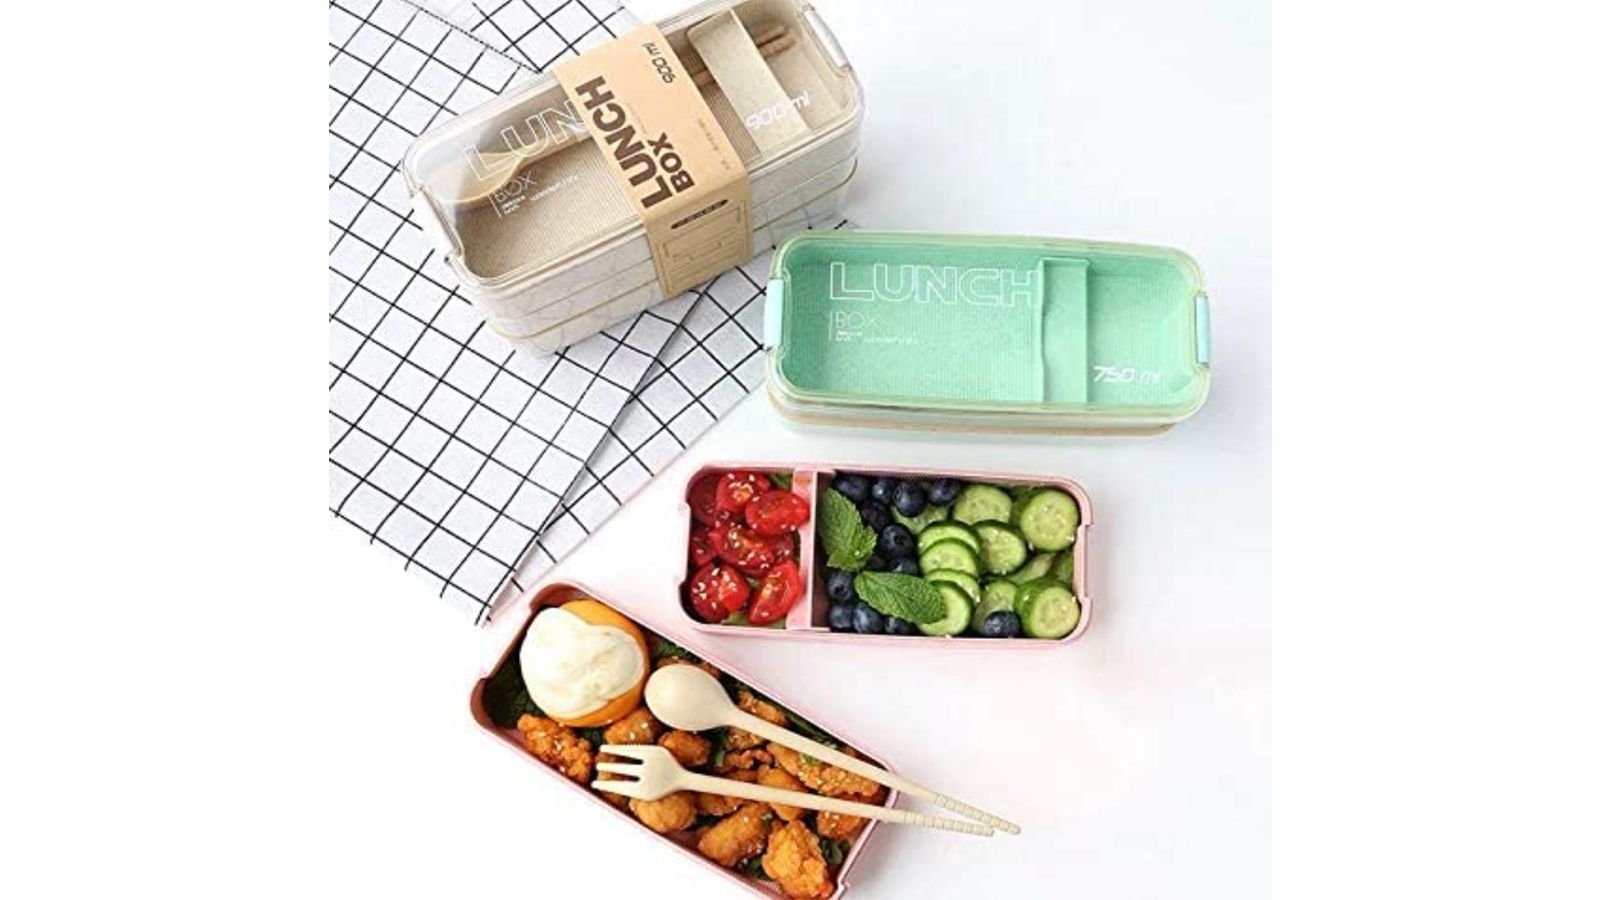 The Best Lunch Containers for School